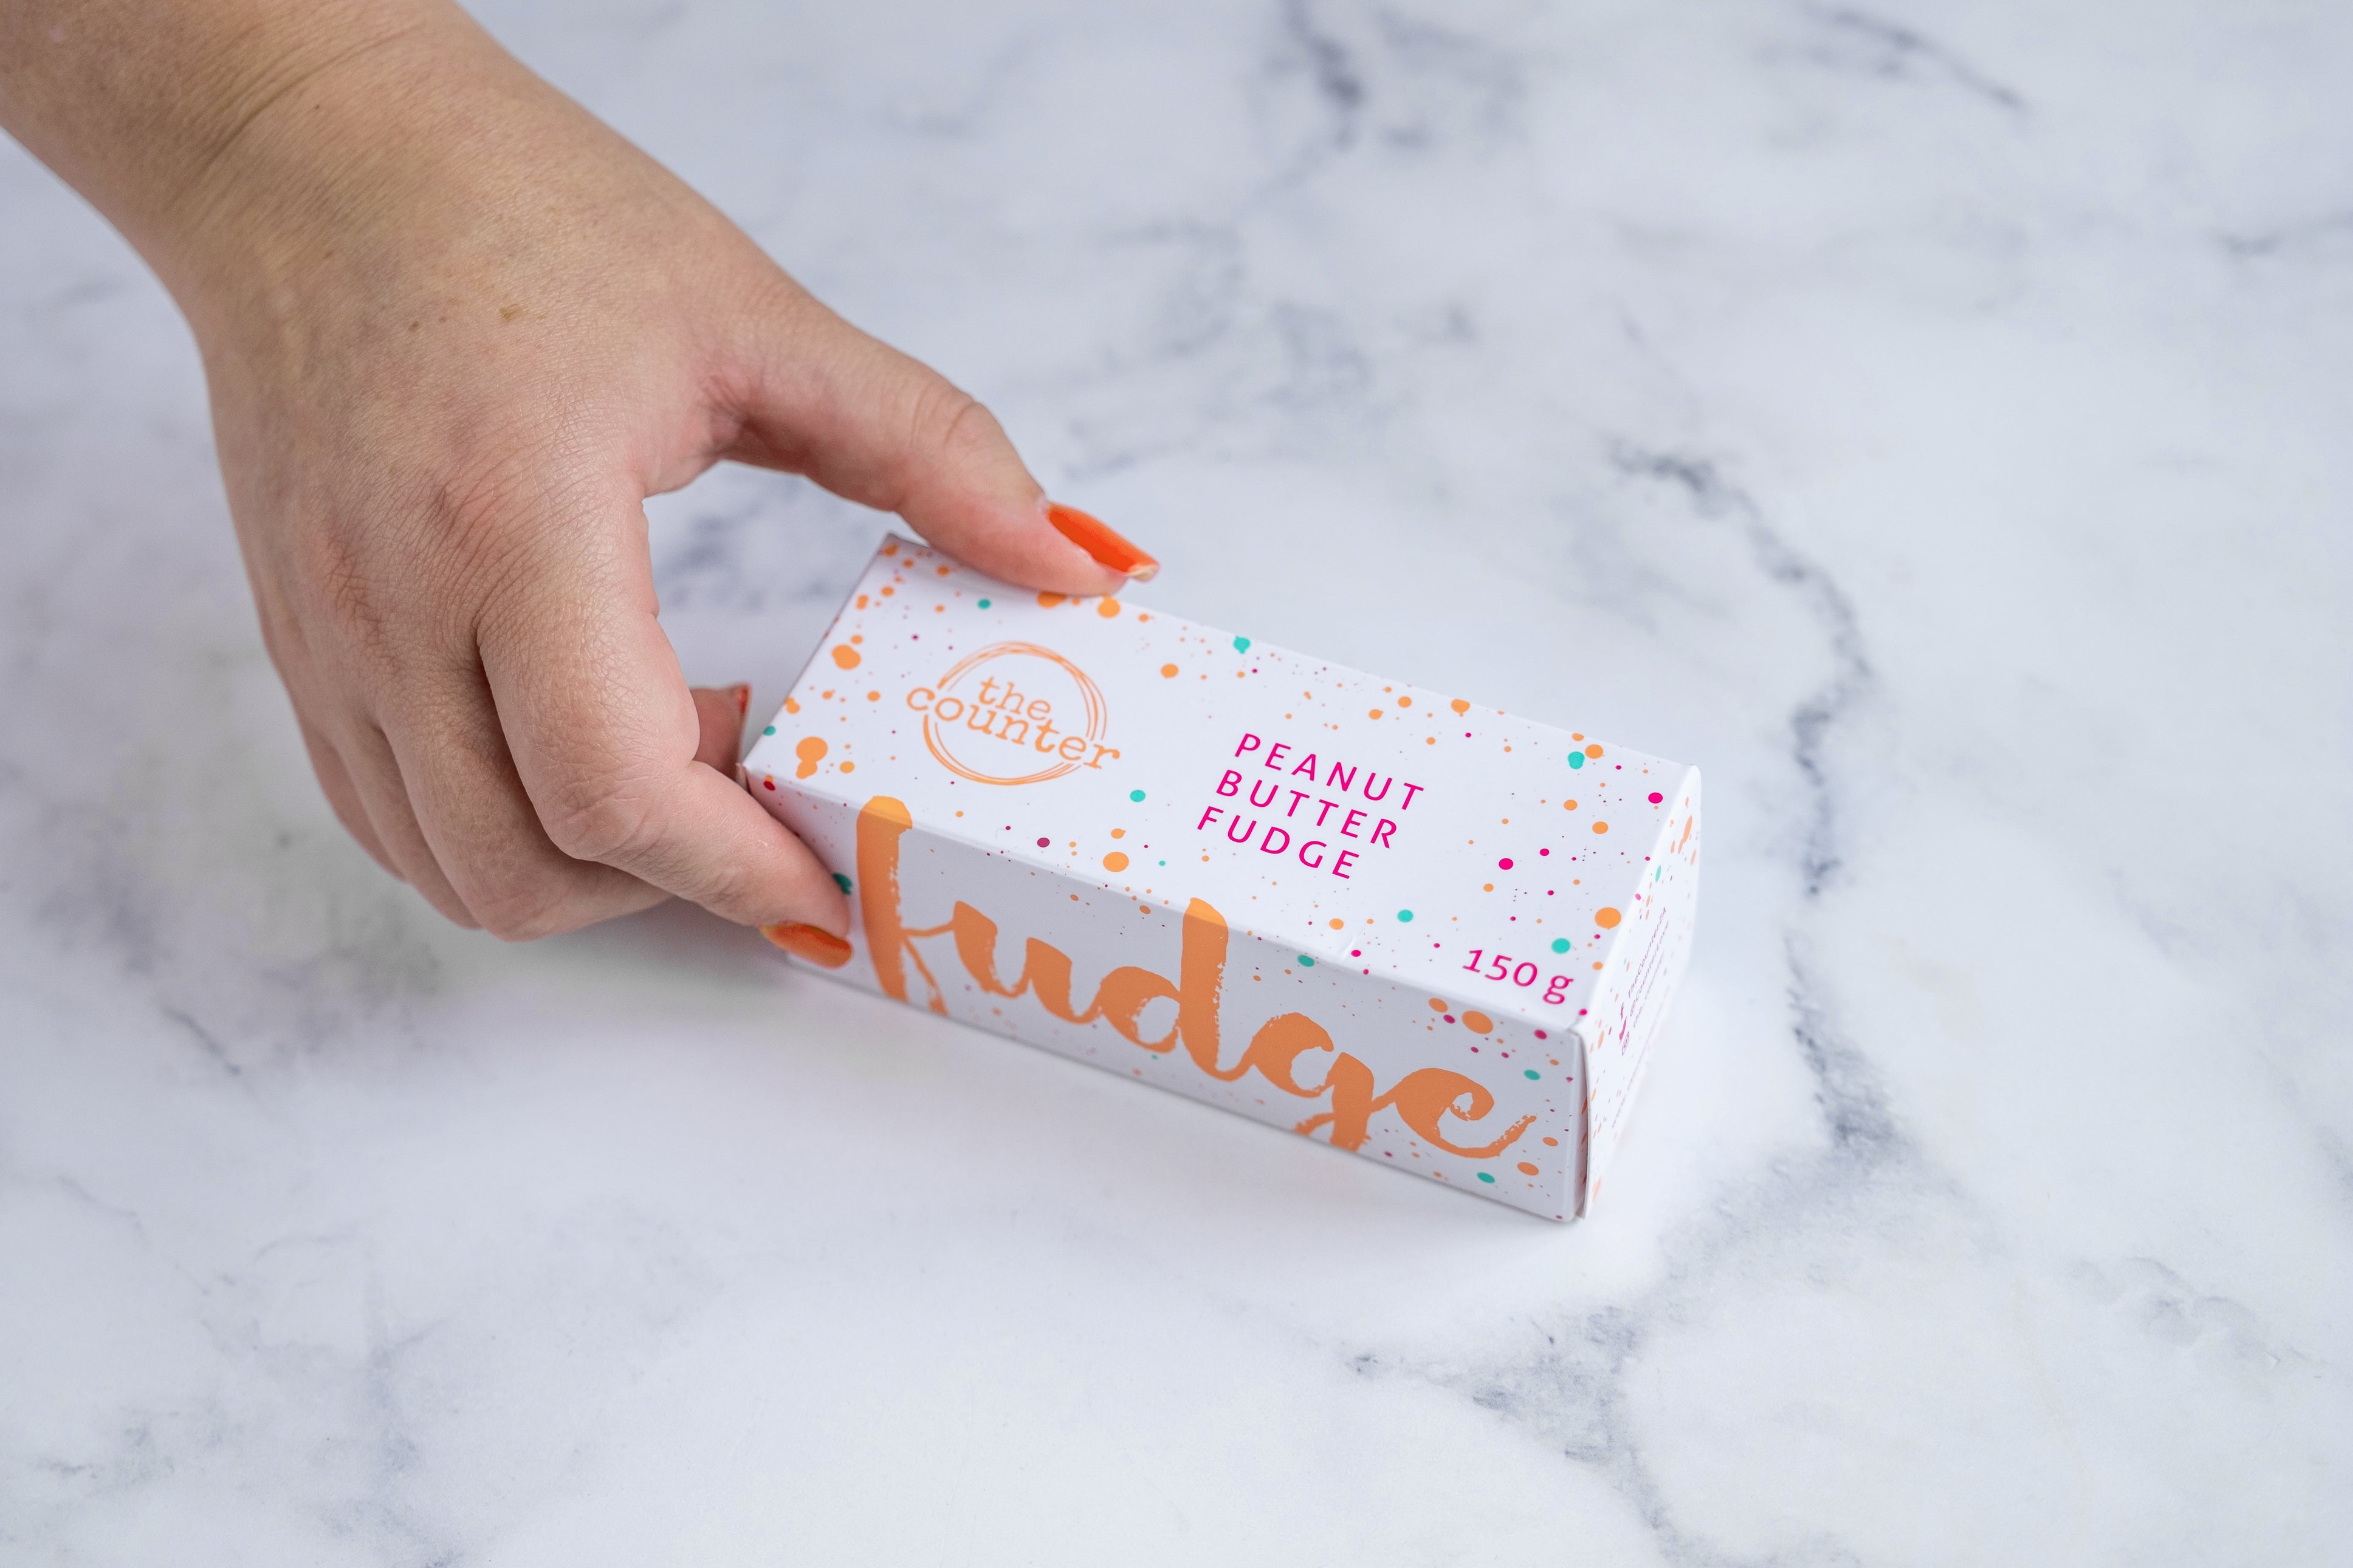 A white box sits on a neutral background. Paint splashes in orange and pink surround a messy circled logo for The Counter and the words ‘Peanut Butter Fudge' and 'Fudge' are written in cerise pink block lettering and cursive orange lettering respectively, on either side of the box. A manicured hand with red nail polish grabs the box.